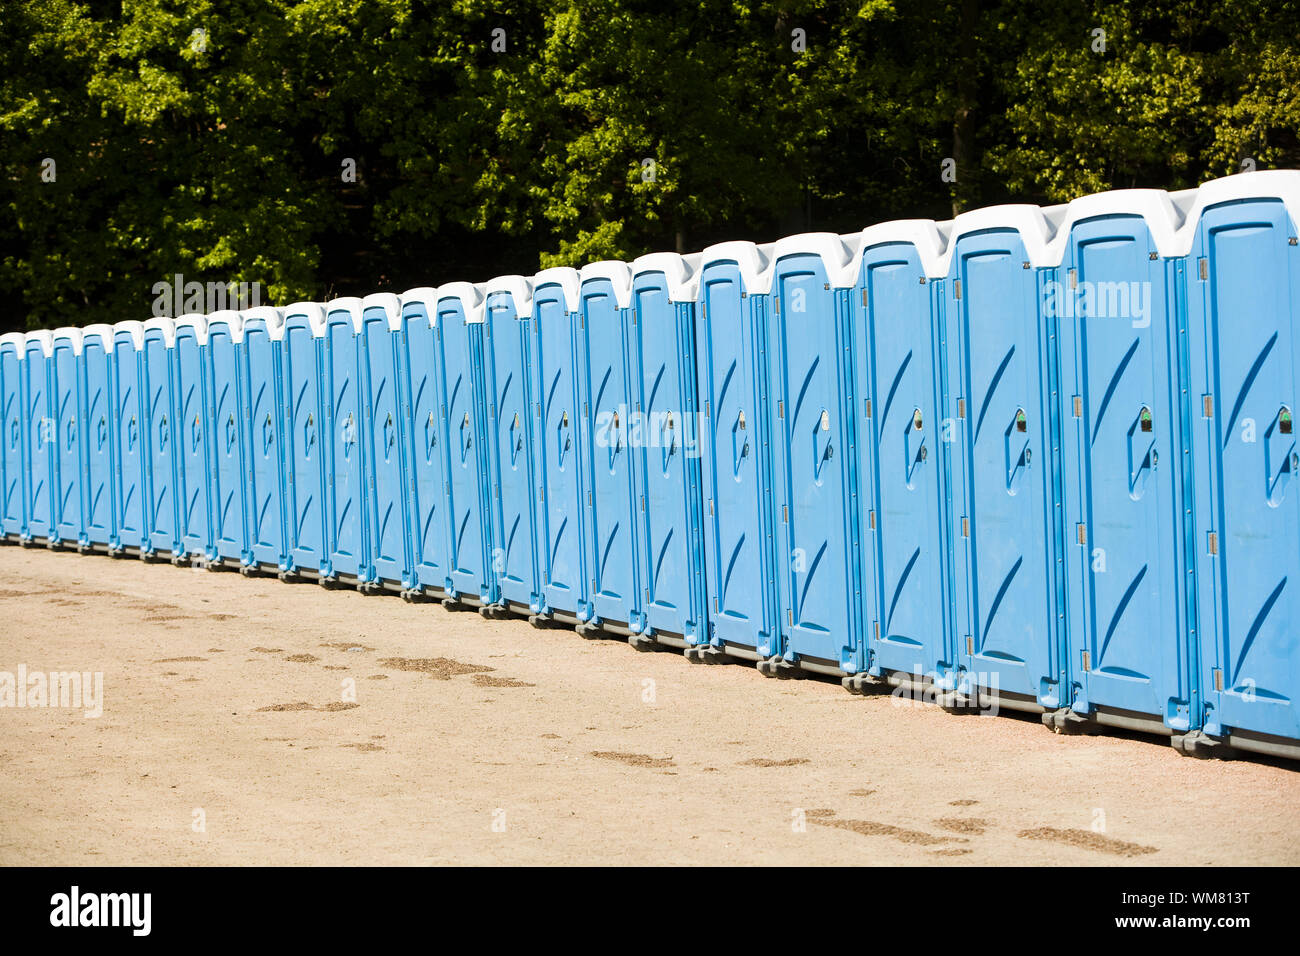 Public toilets in a row Stock Photo